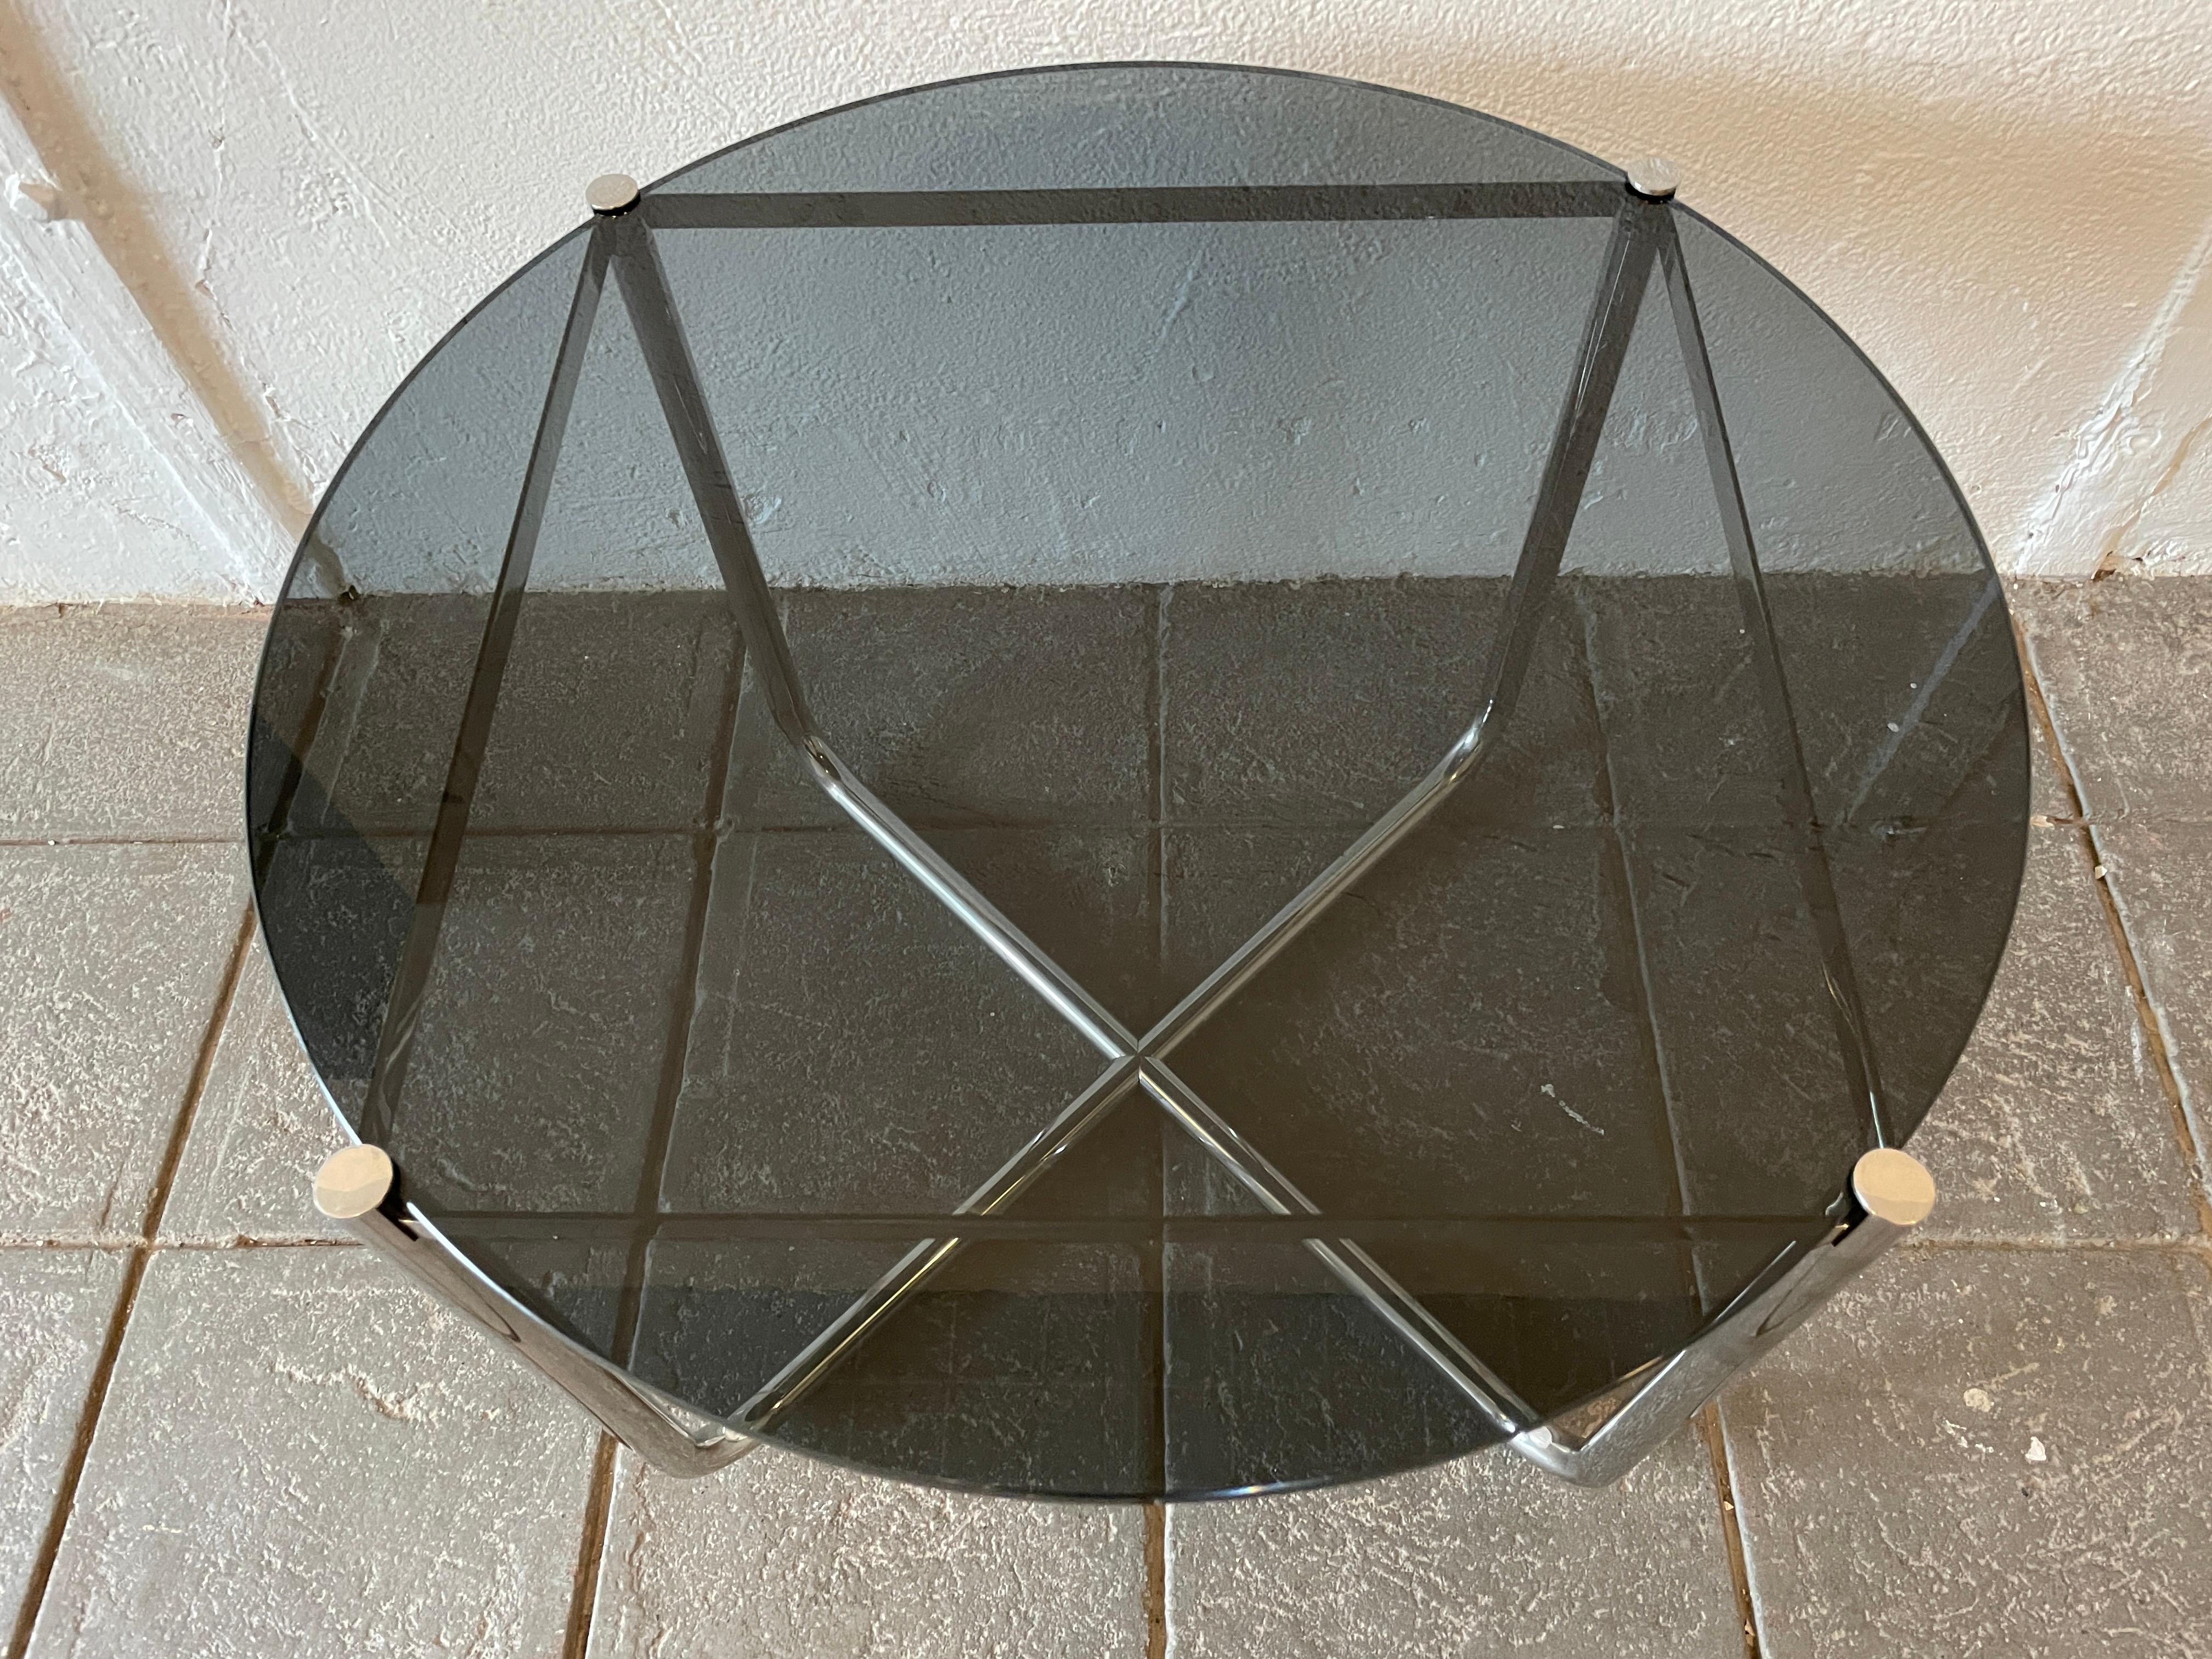 Beautiful heavy chromed round side table featuring a thick tinted glass top and bent tube frame. The top can be removed from the frame for easier moving. The dia. is 20 inches and the height is 22 inches. Showing very little use.

Glass is tinted